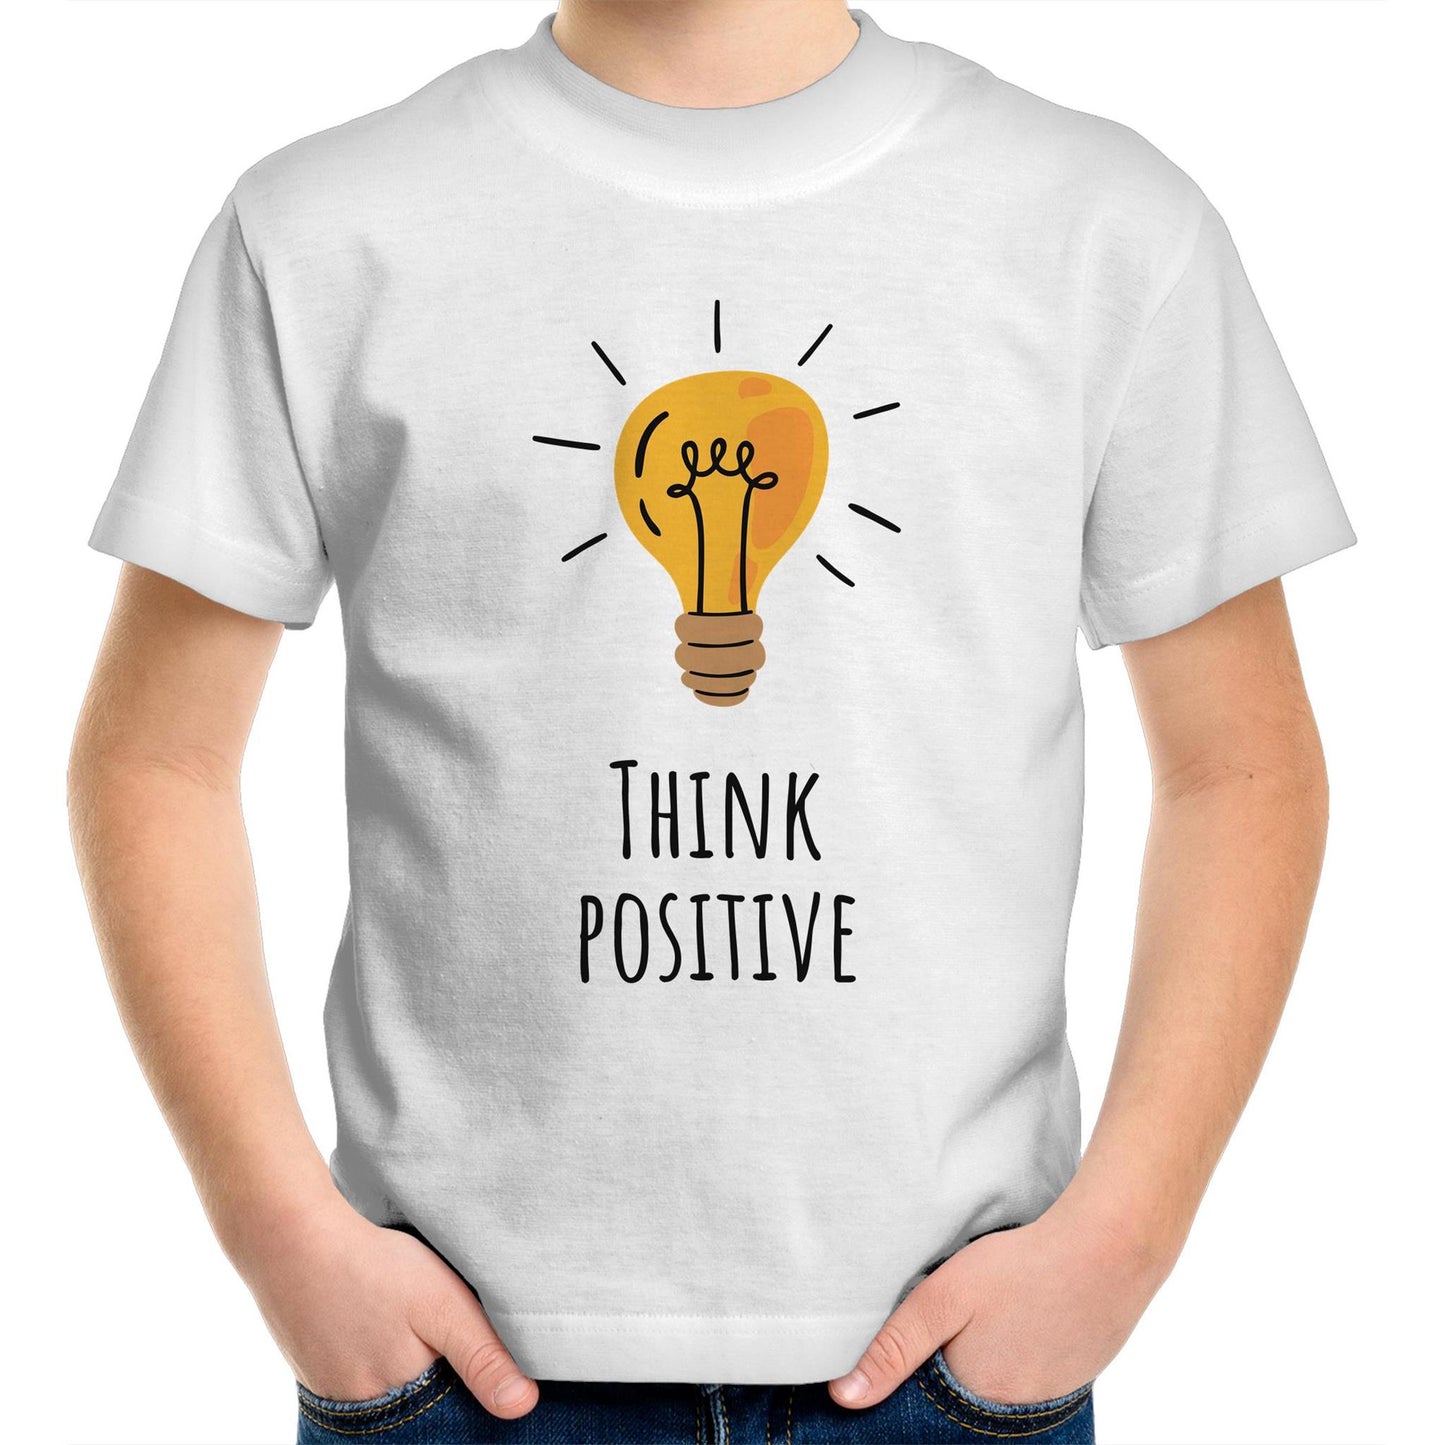 Think Positive - Kids Youth Crew T-Shirt White Kids Youth T-shirt